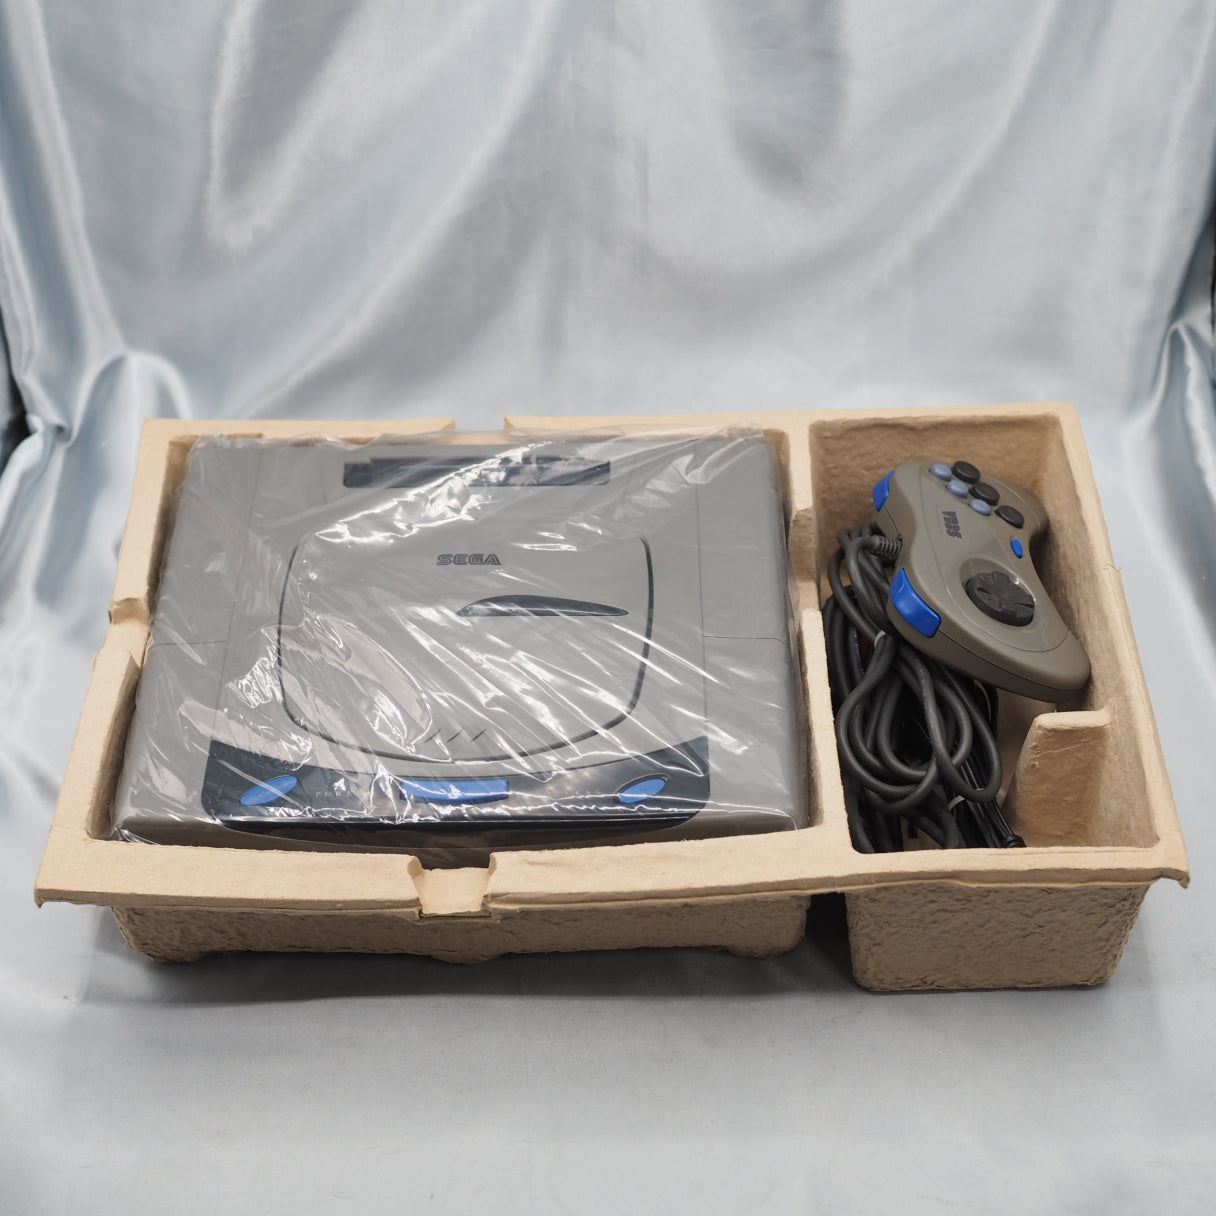 Sega Saturn GREY Console System Campaign Boxed HST-3200